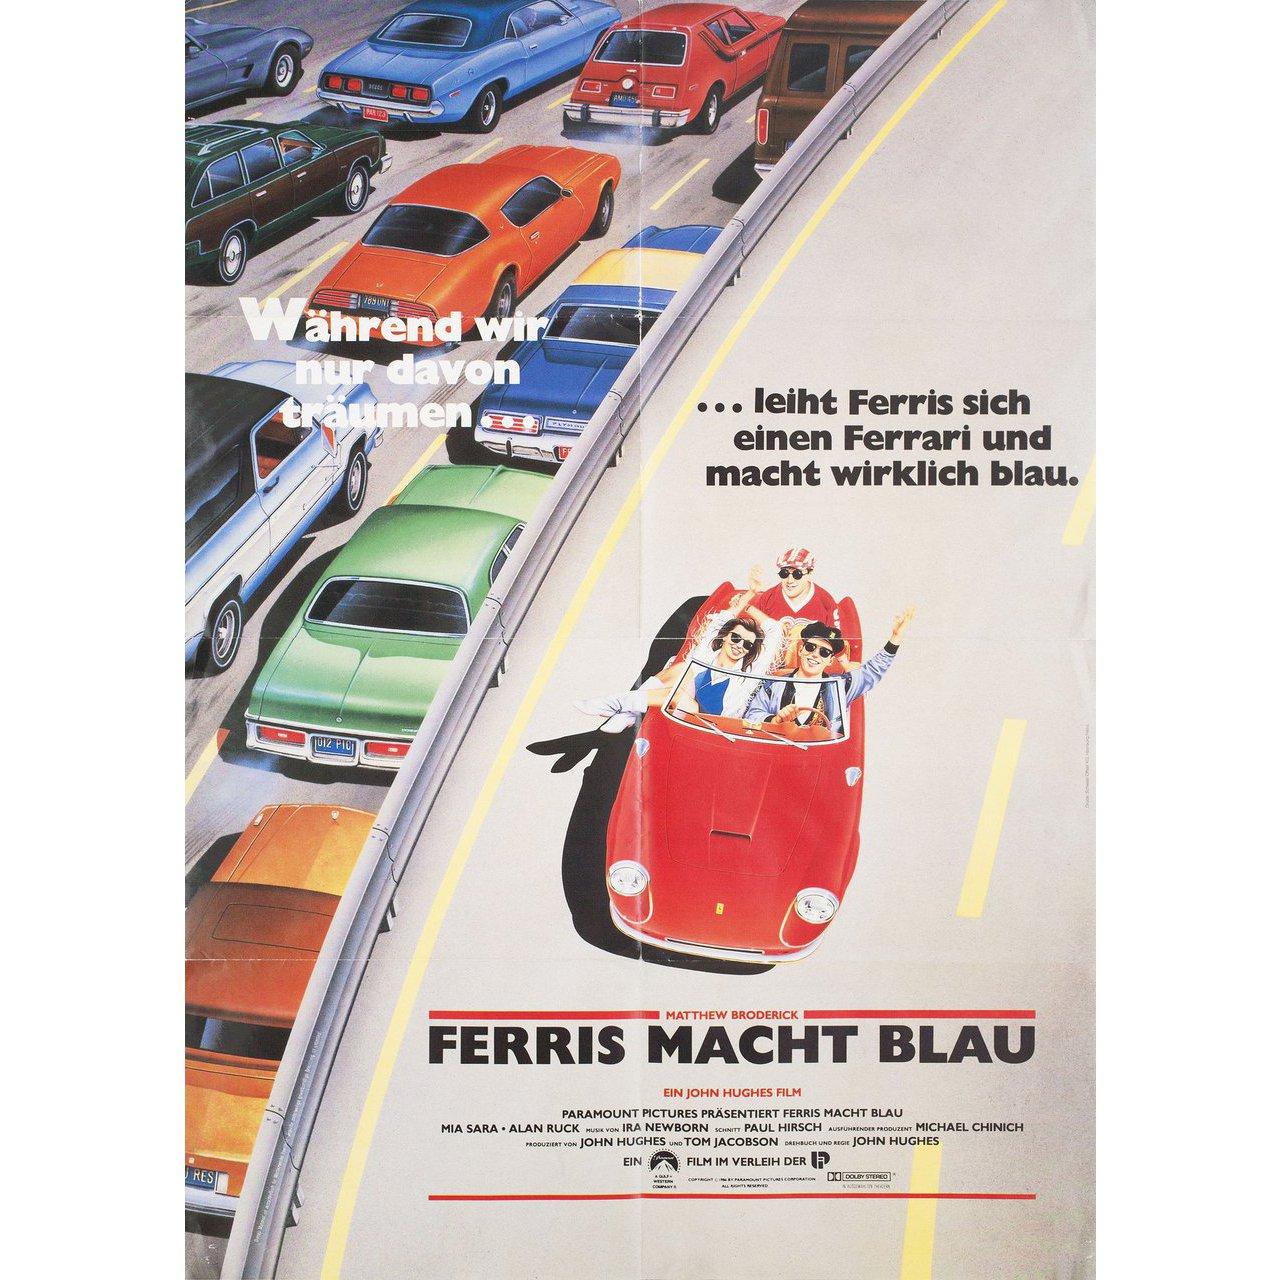 Original 1986 German A1 poster for the film Ferris Bueller's Day Off directed by John Hughes with Matthew Broderick / Alan Ruck / Mia Sara / Jeffrey Jones. Very Good-Fine condition, folded with pinholes. Many original posters were issued folded or